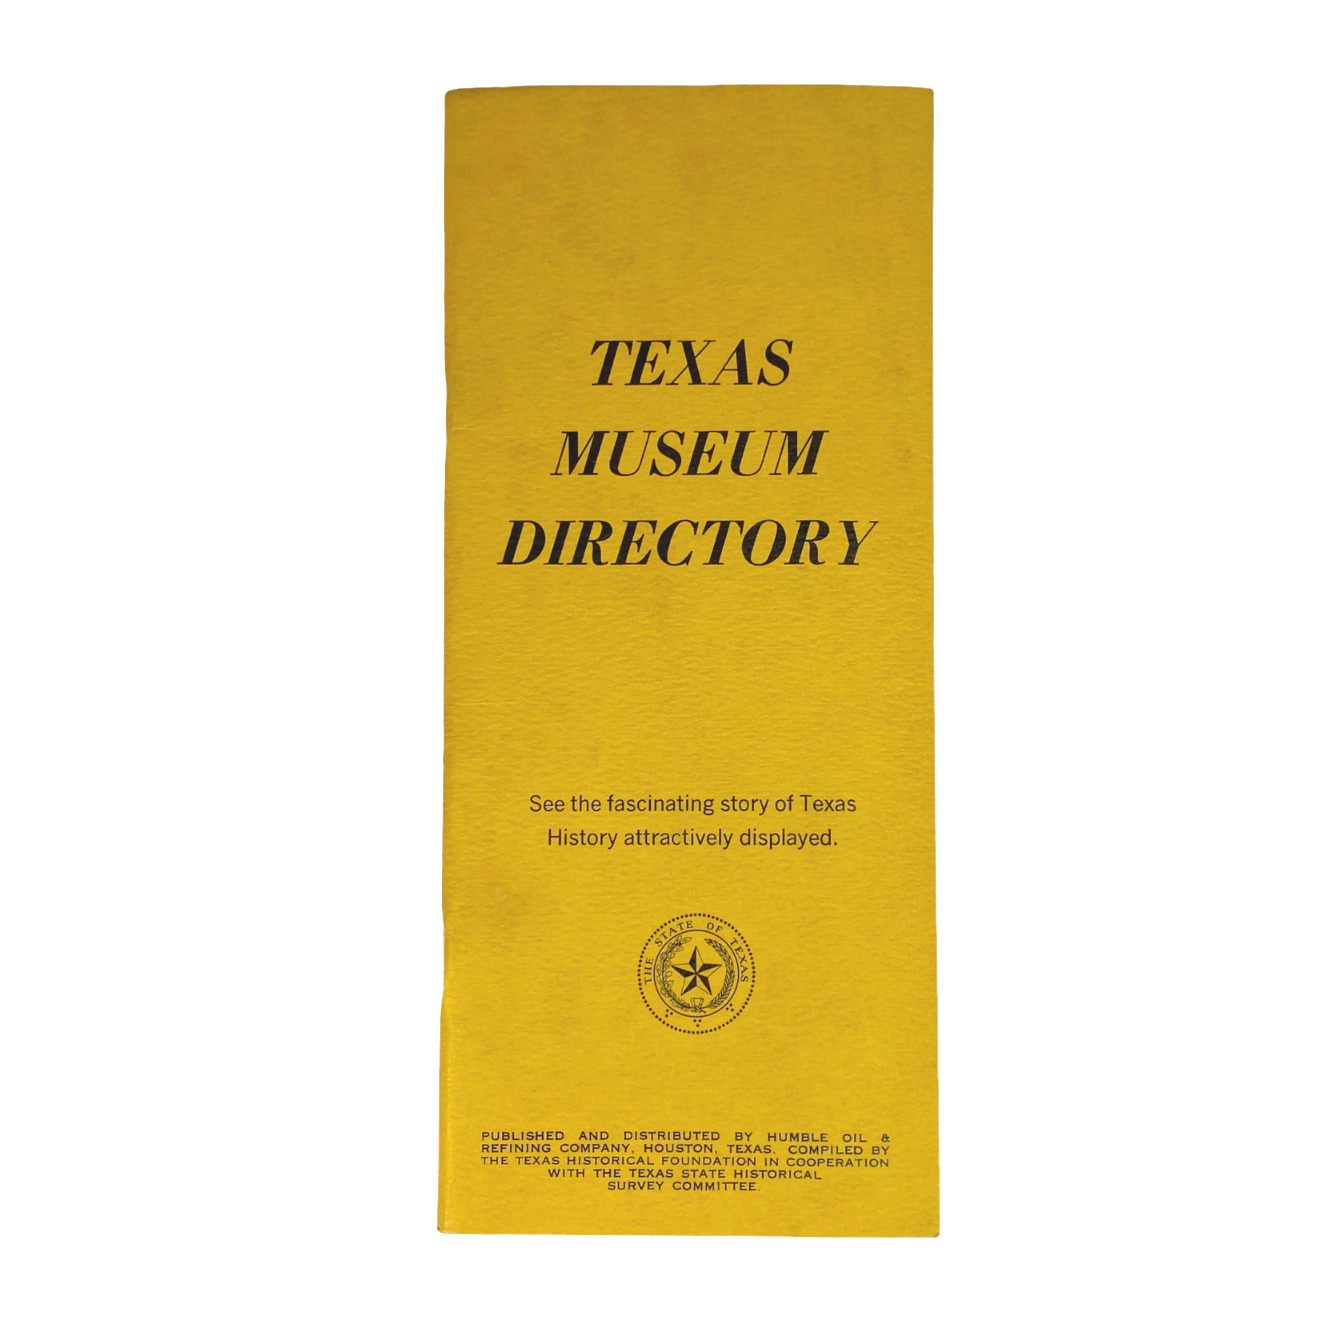 1968 Texas Museum Directory Booklet by Enco/Humble Oil Company (Esso Exxon)